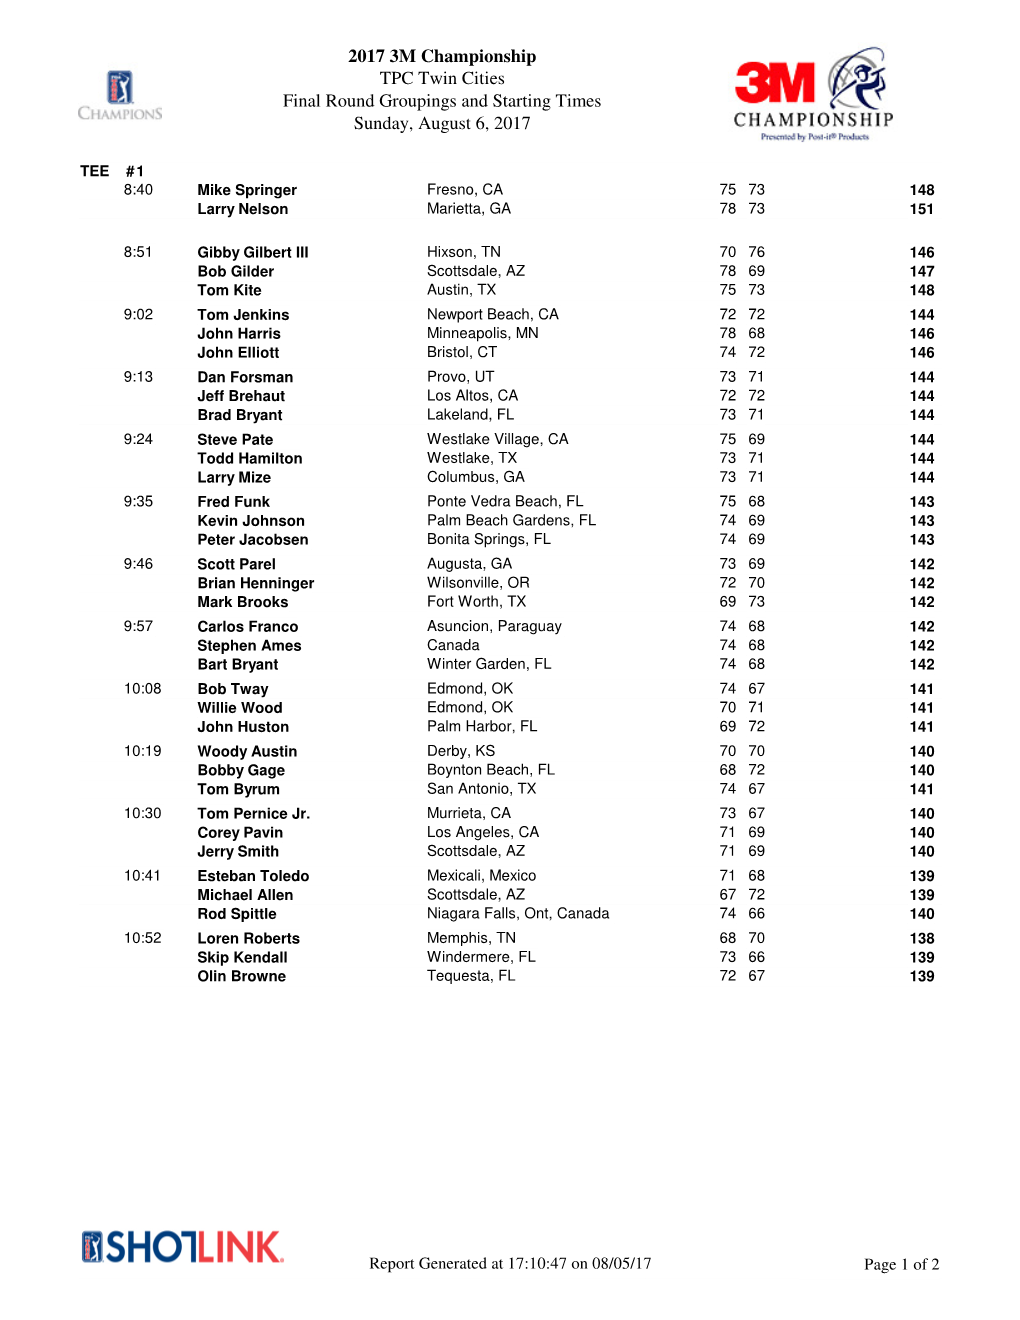 2017 3M Championship TPC Twin Cities Final Round Groupings and Starting Times Sunday, August 6, 2017